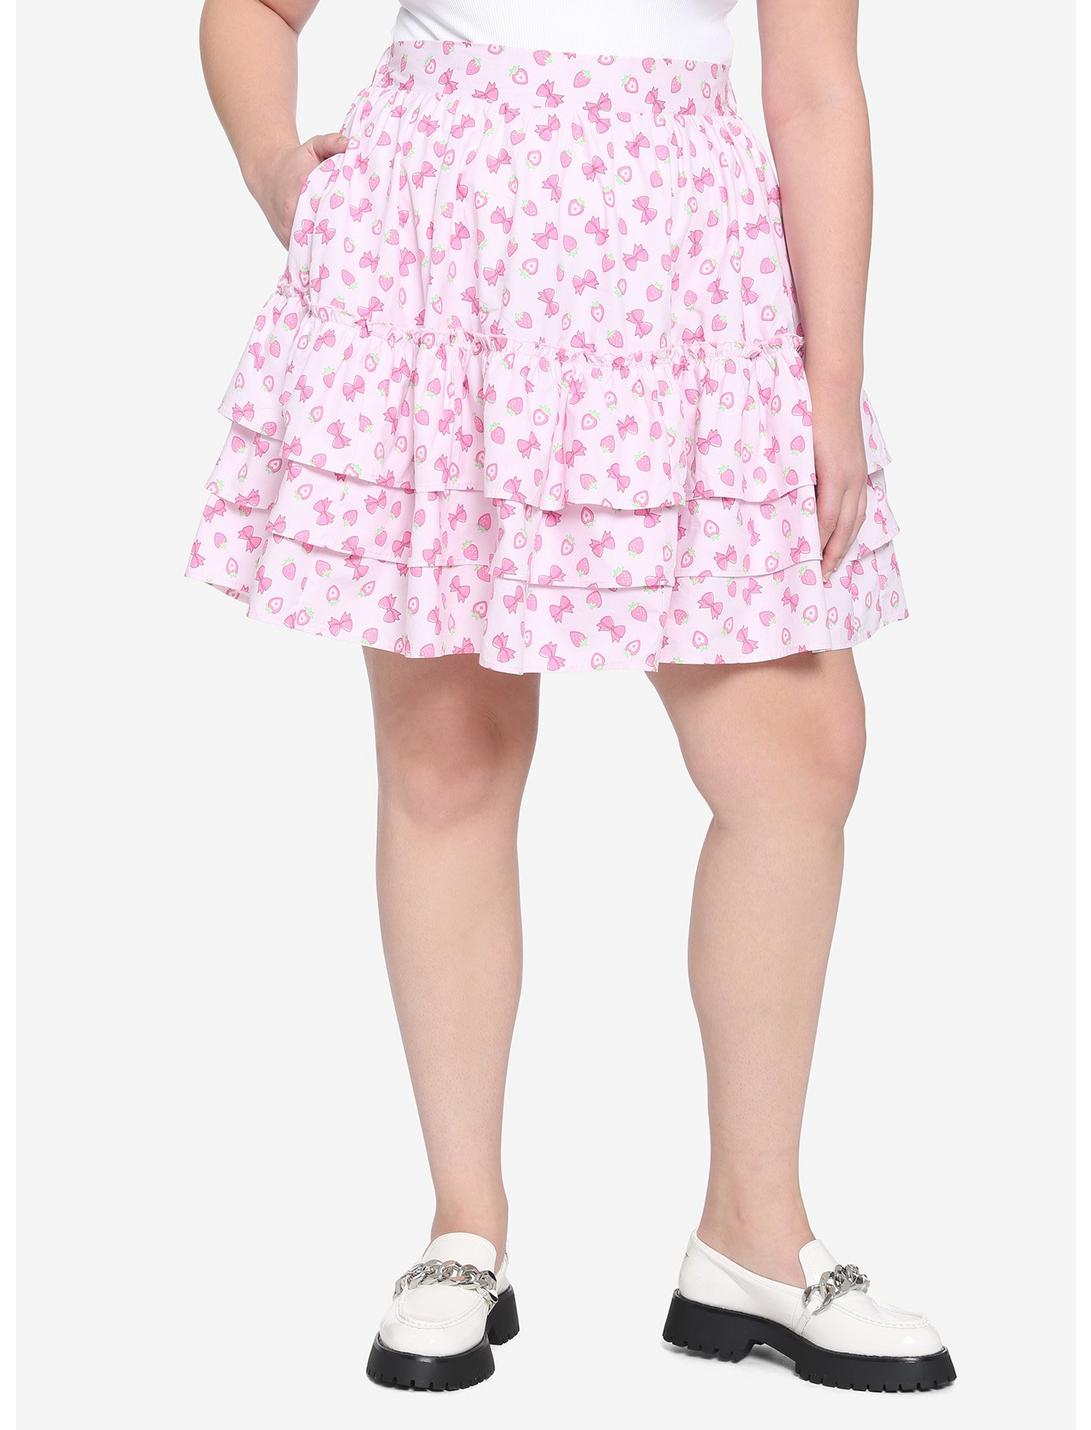 Strawberry & Bows Petticoat Skirt Plus Size, PINK, hi-res